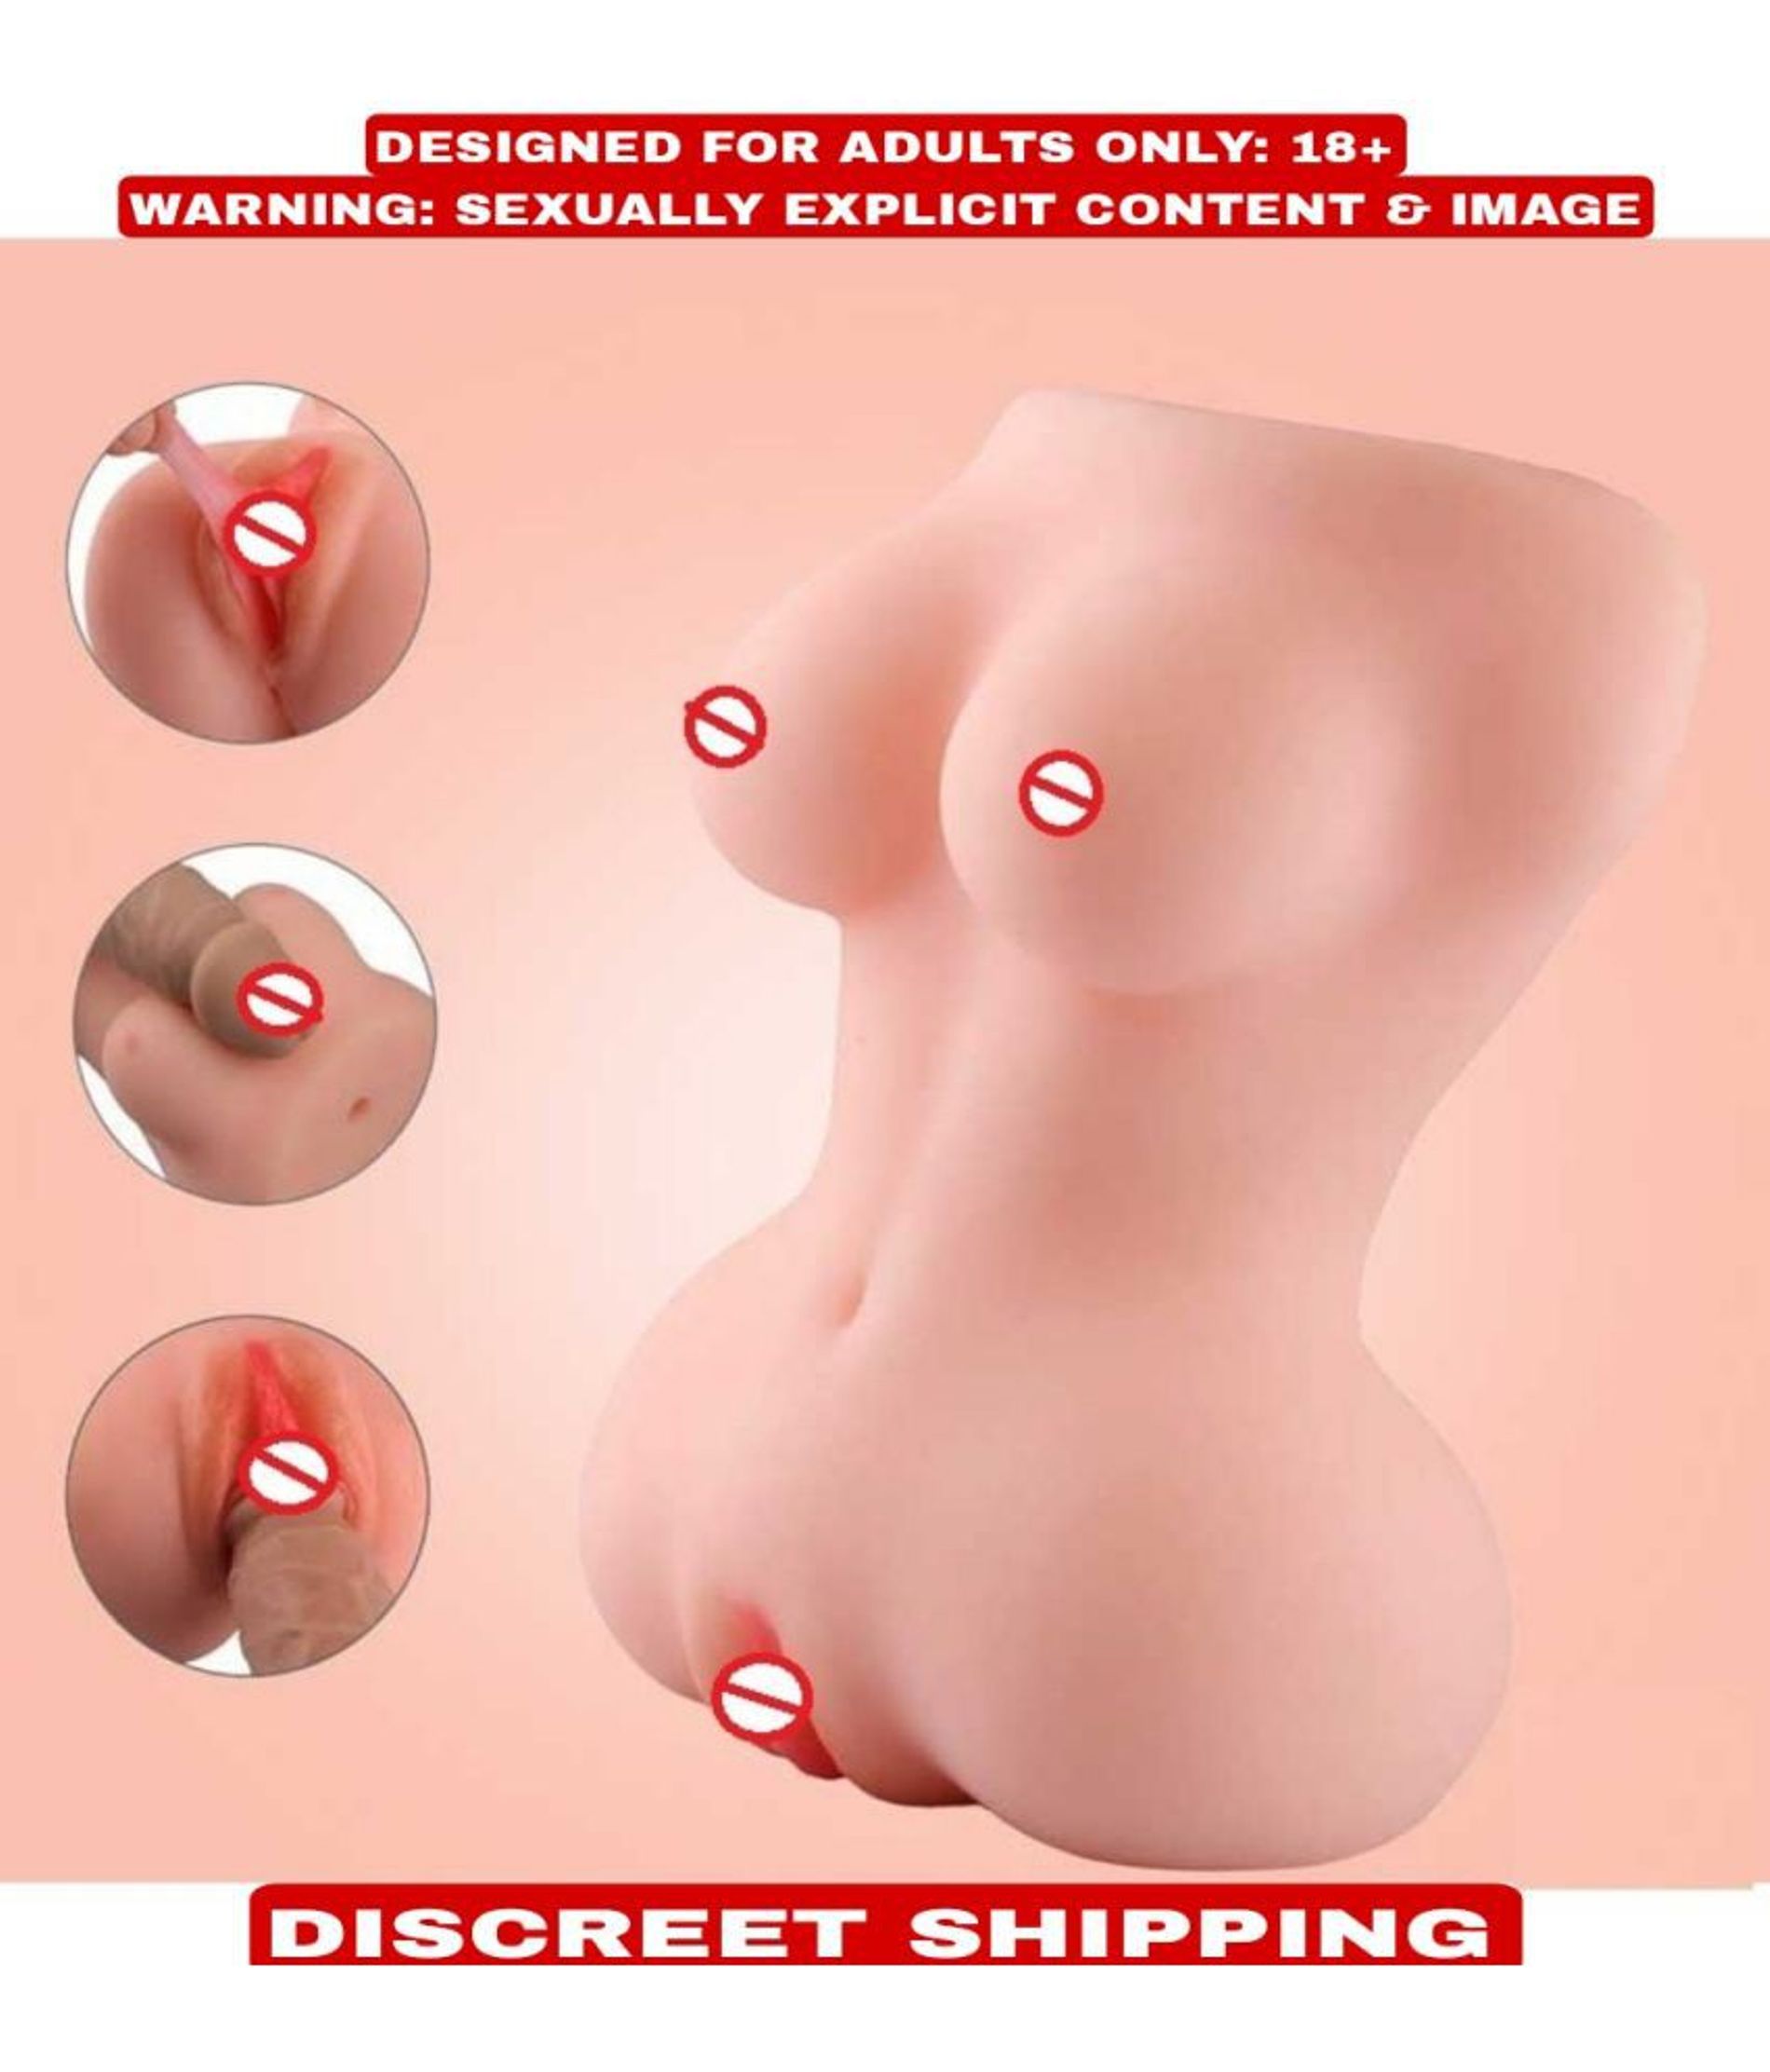     			PASSION LADY - PEFECT BODY SHAPE WITH BOOBS & ROUND HIP FOR PEFECT FUN - DOGGY STYLE FUN - ULTIMATE CLIMAX MALE MASTURBATOR SEX TOY - SEX TANTRA